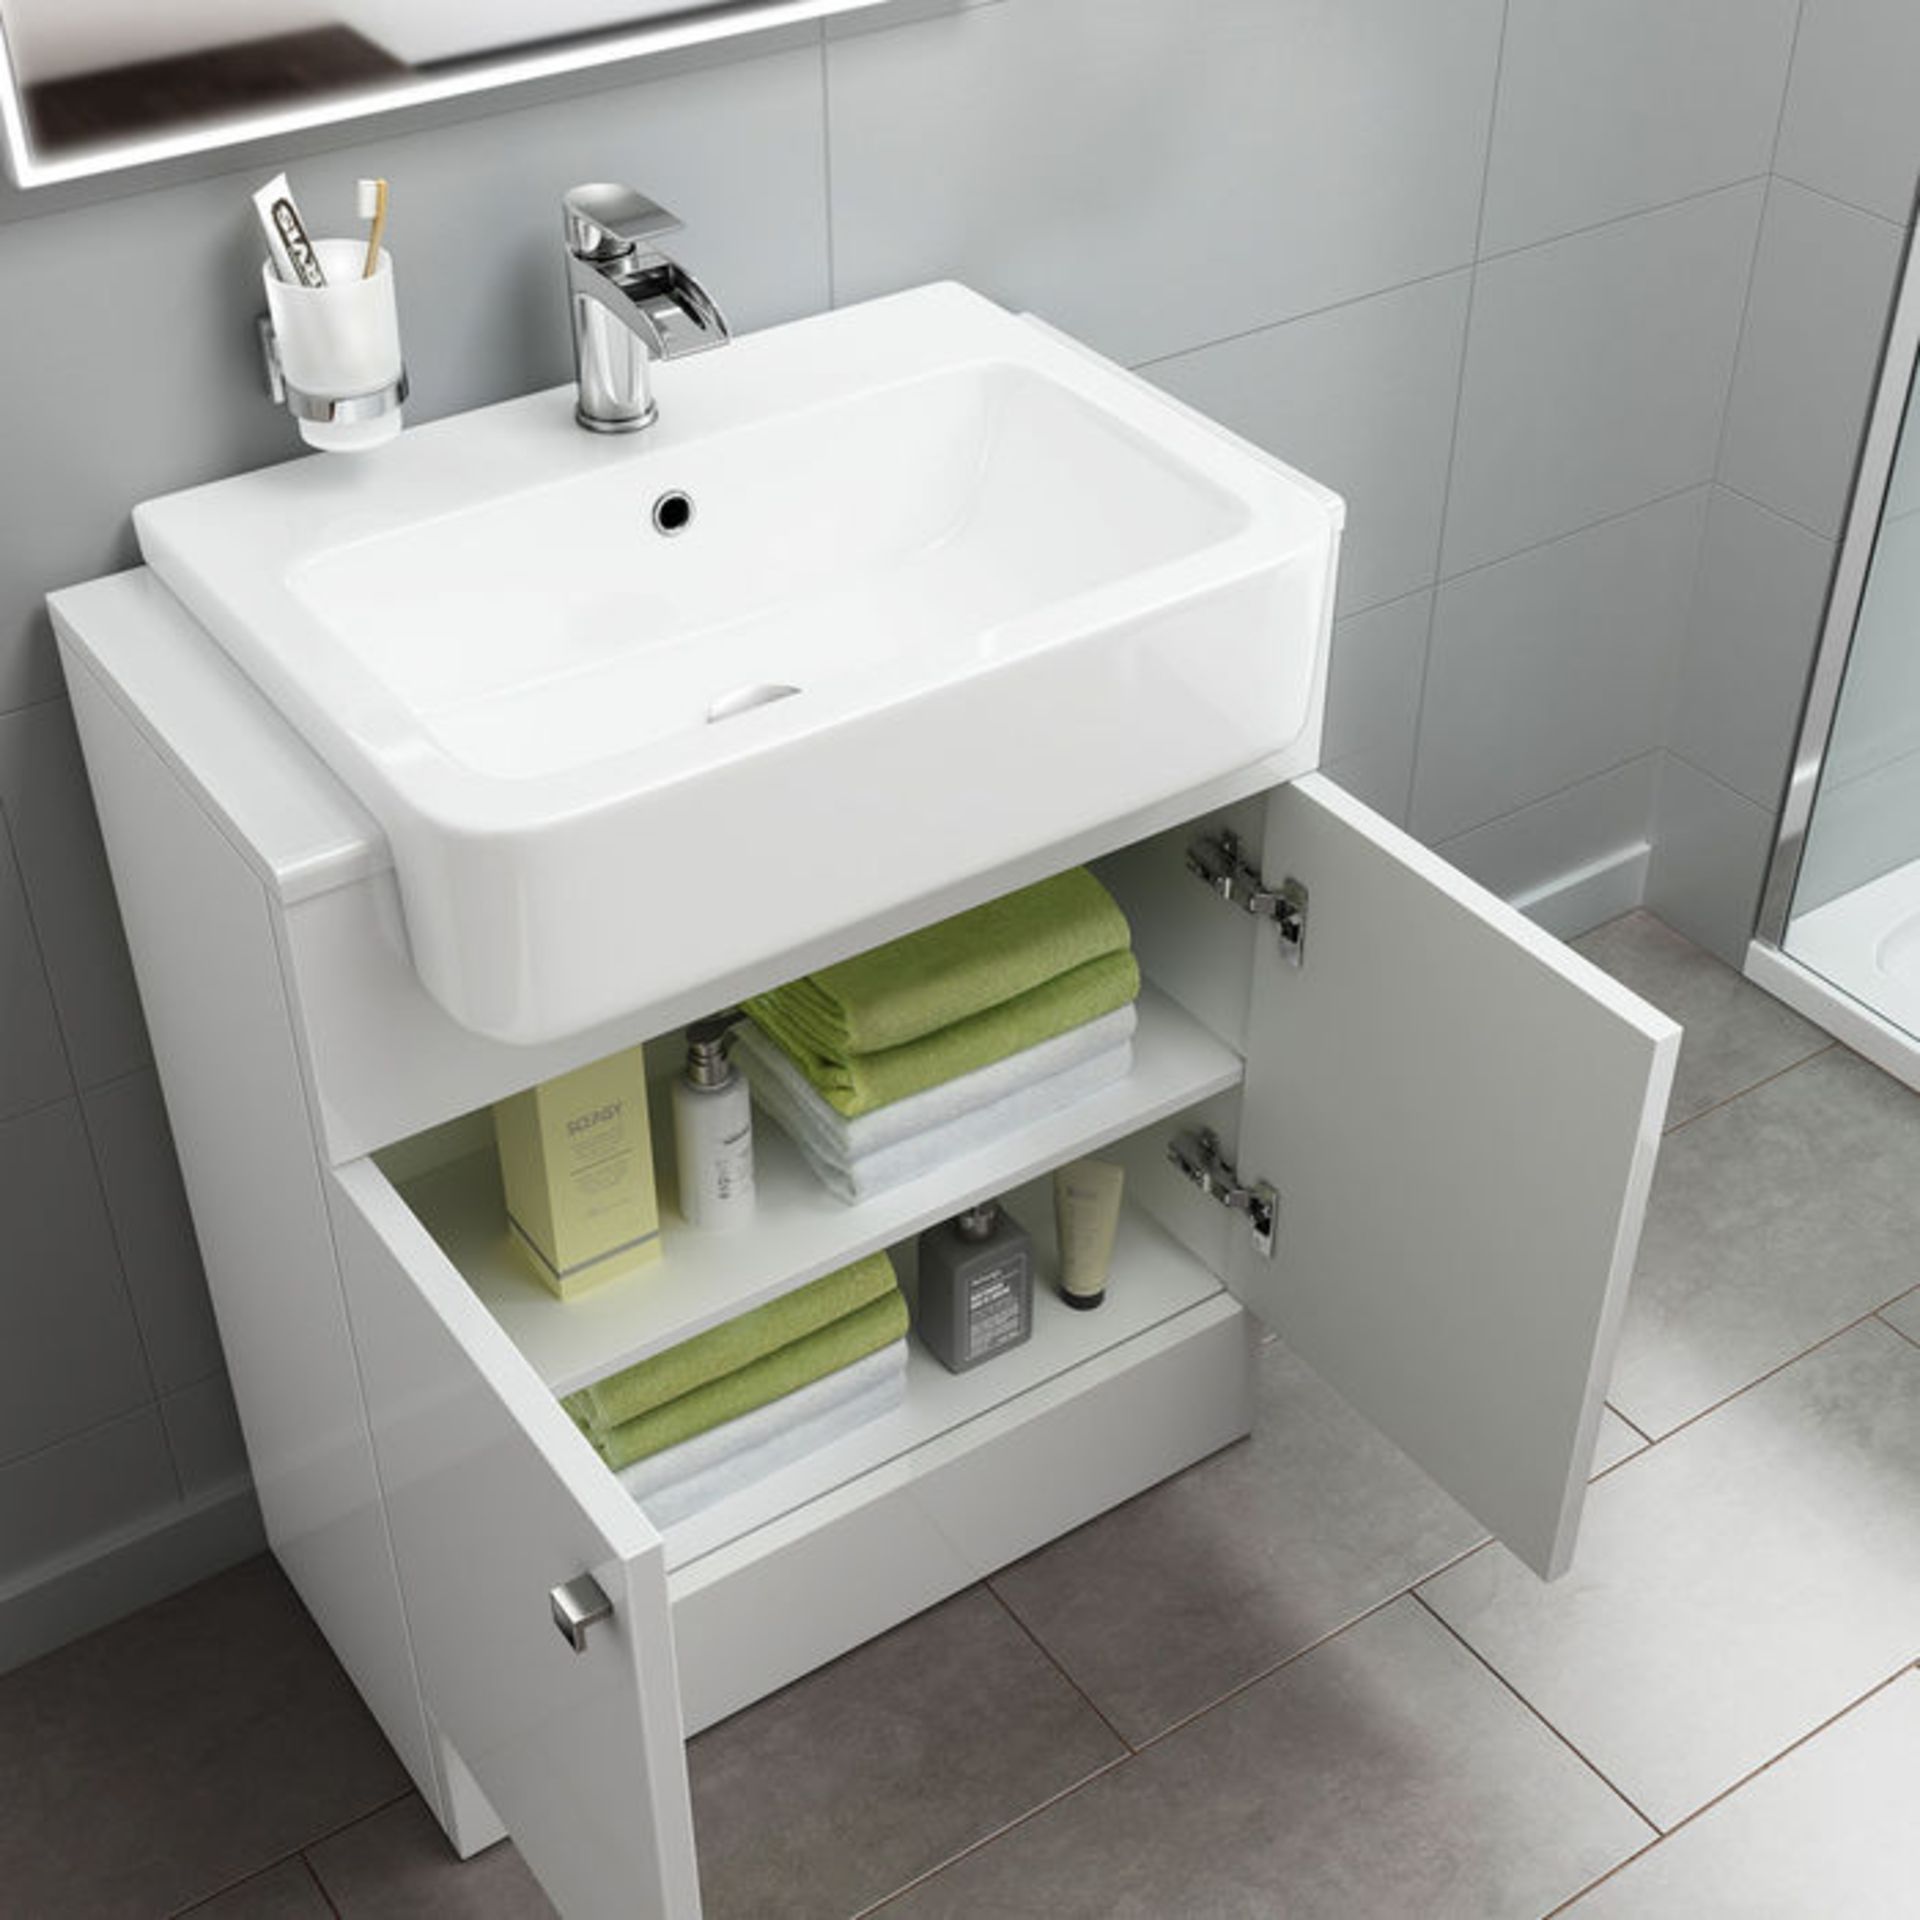 (O103) 660mm Harper Gloss White Basin Vanity Unit - Floor Standing. RRP £499.99. COMES COMPLETE WITH - Image 2 of 2